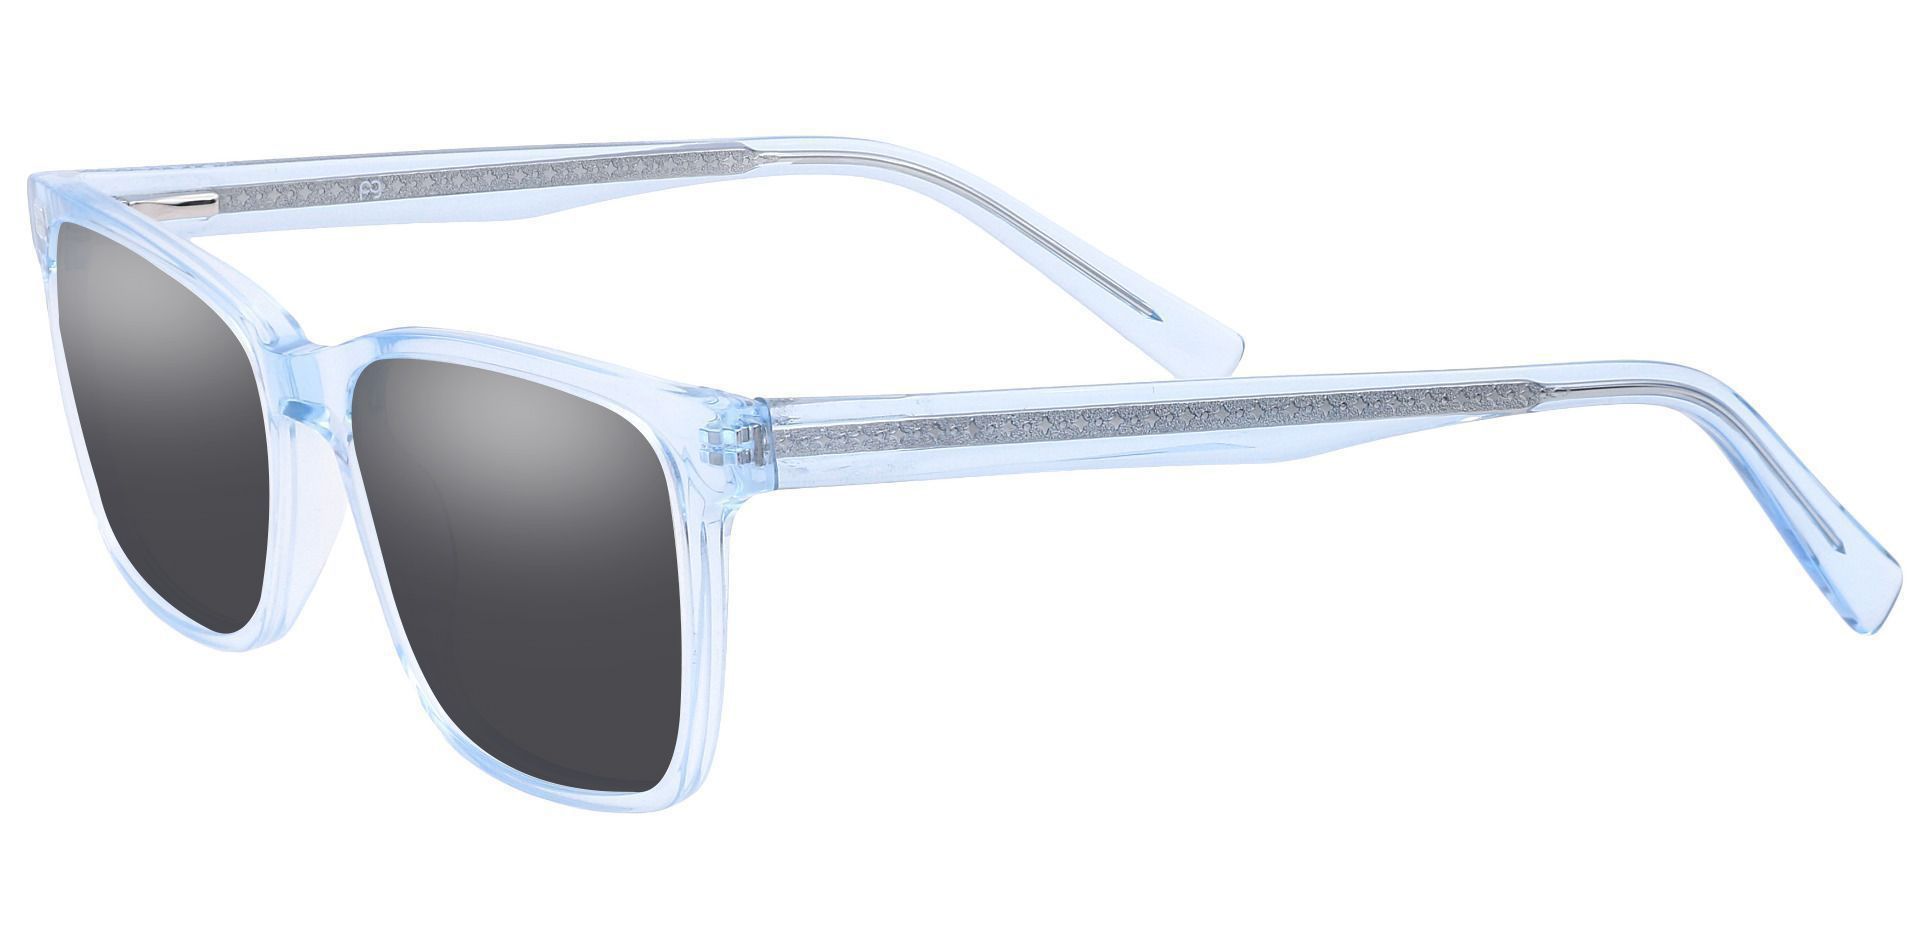 Galaxy Rectangle Reading Sunglasses - Blue Frame With Gray Lenses